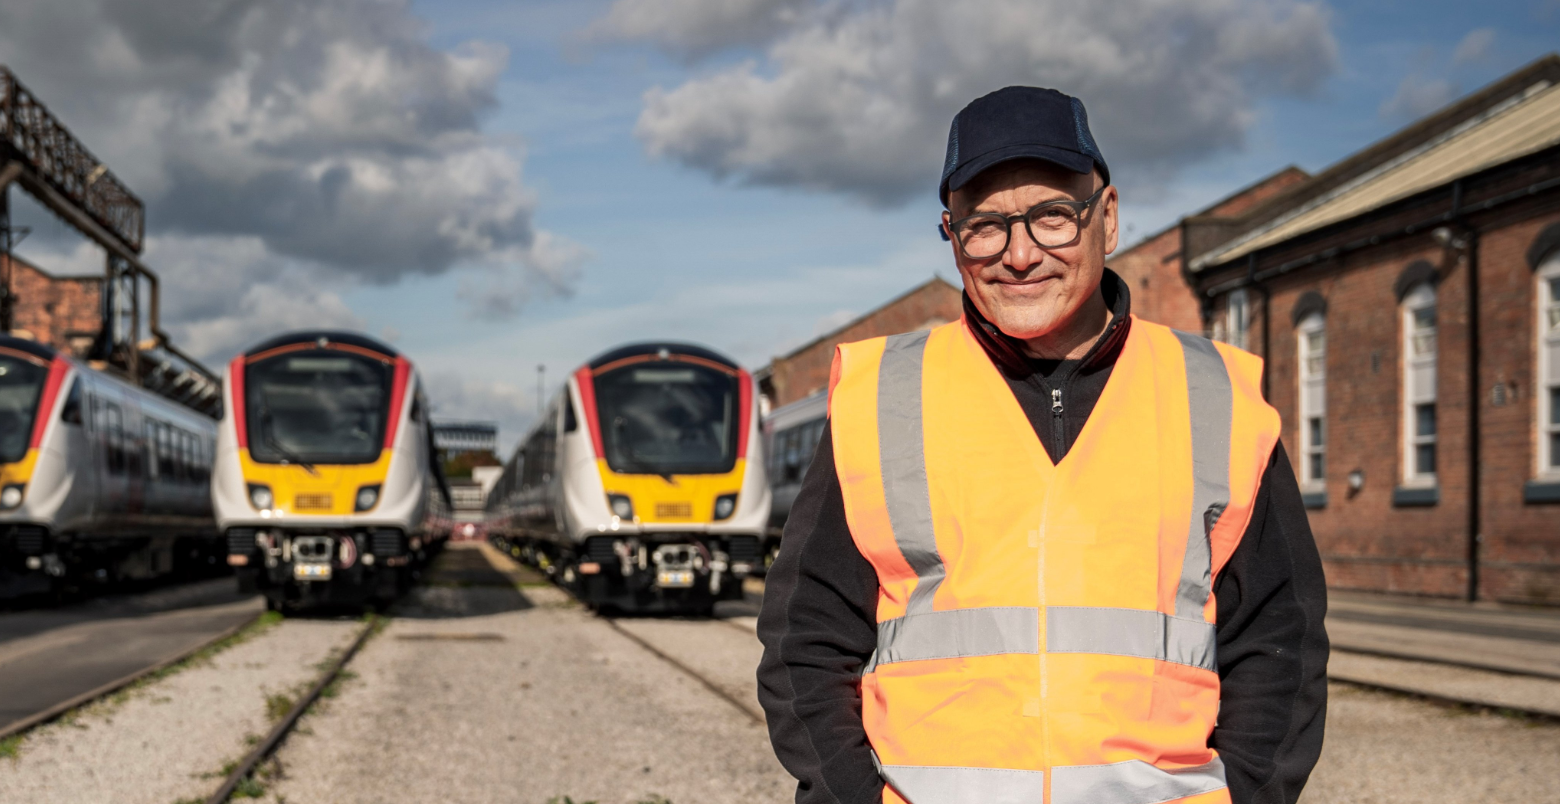 Train-maker stars in BBC’s Inside the Factory show